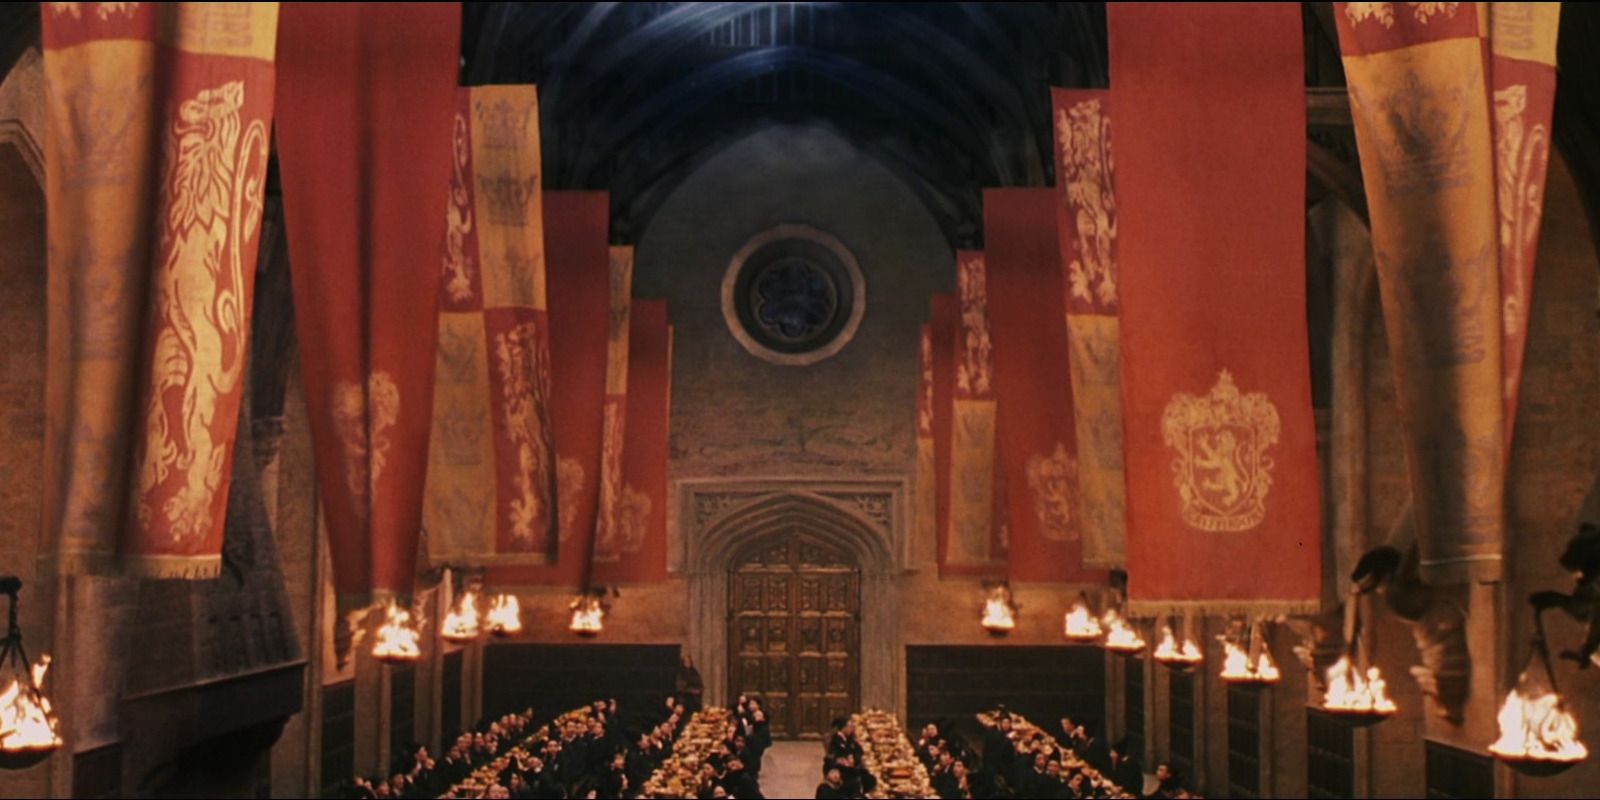 Gryffindor wins the House Cup in Harry Potter